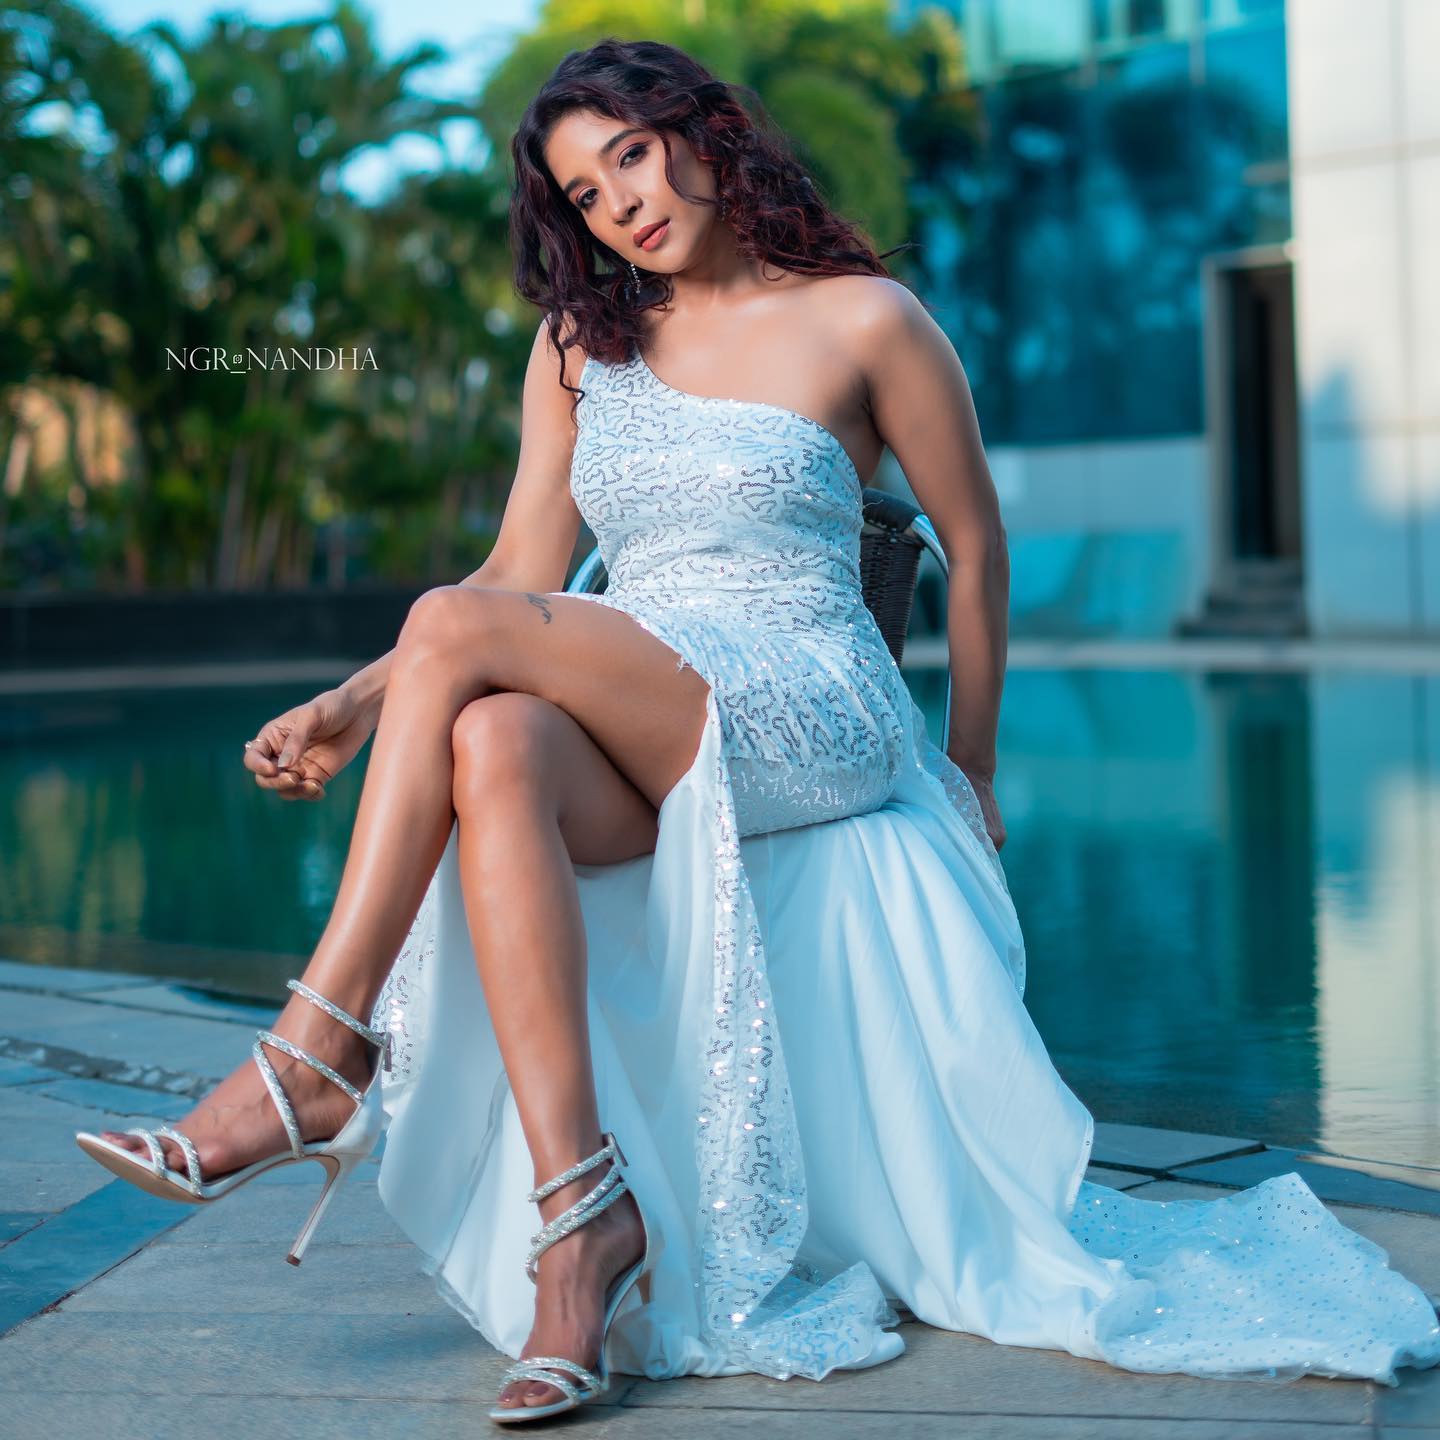 Sakshi agarwal hot photoshoot and video posted on instagram in white single sleeve dress